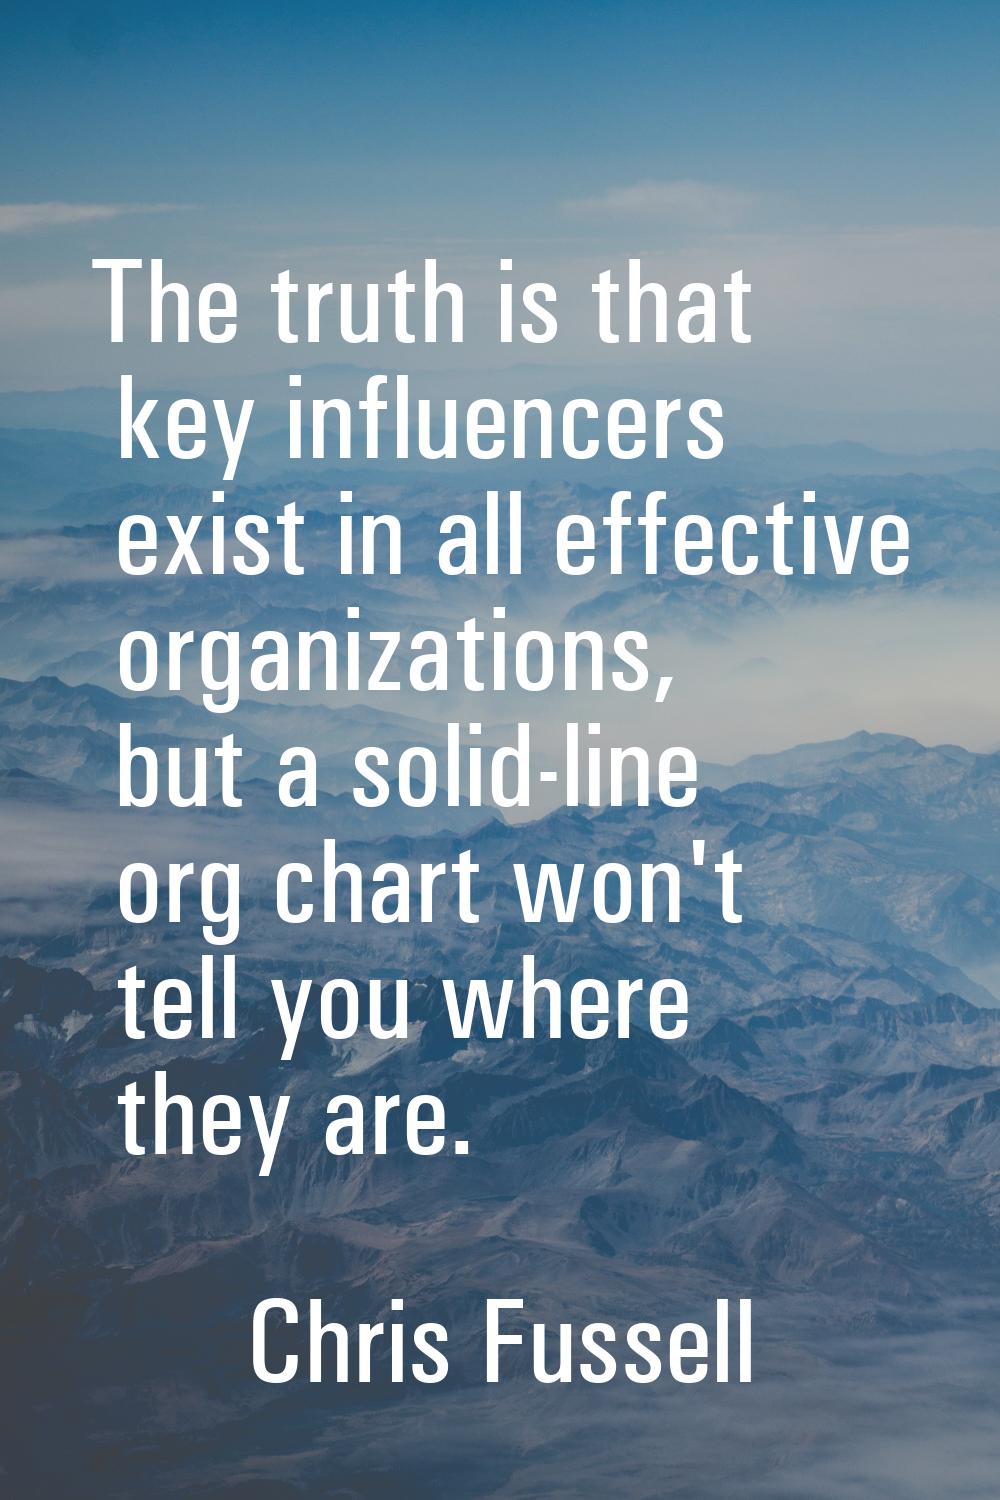 The truth is that key influencers exist in all effective organizations, but a solid-line org chart 